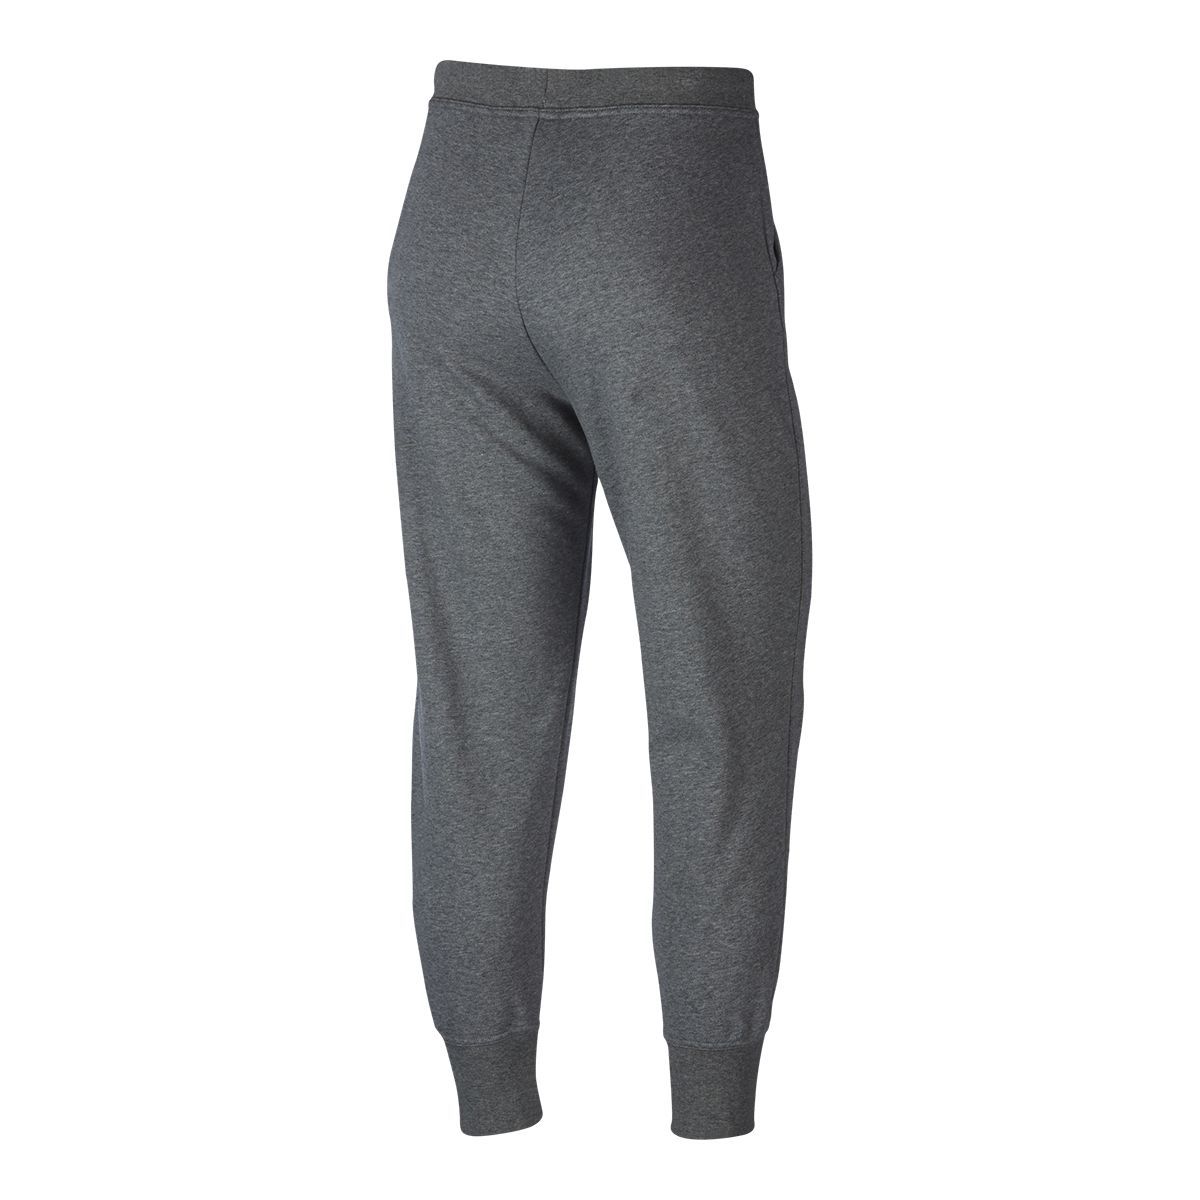 https://media-www.atmosphere.ca/product/div-03-softgoods/dpt-70-athletic-clothing/sdpt-02-womens/333199009/nike-w-dry-get-fit-flc-pant-carbon-heather-smoke-grey-xs--ca7f8fed-5be8-4803-8a98-601ab9cfd2ed-jpgrendition.jpg?imdensity=1&imwidth=1244&impolicy=mZoom